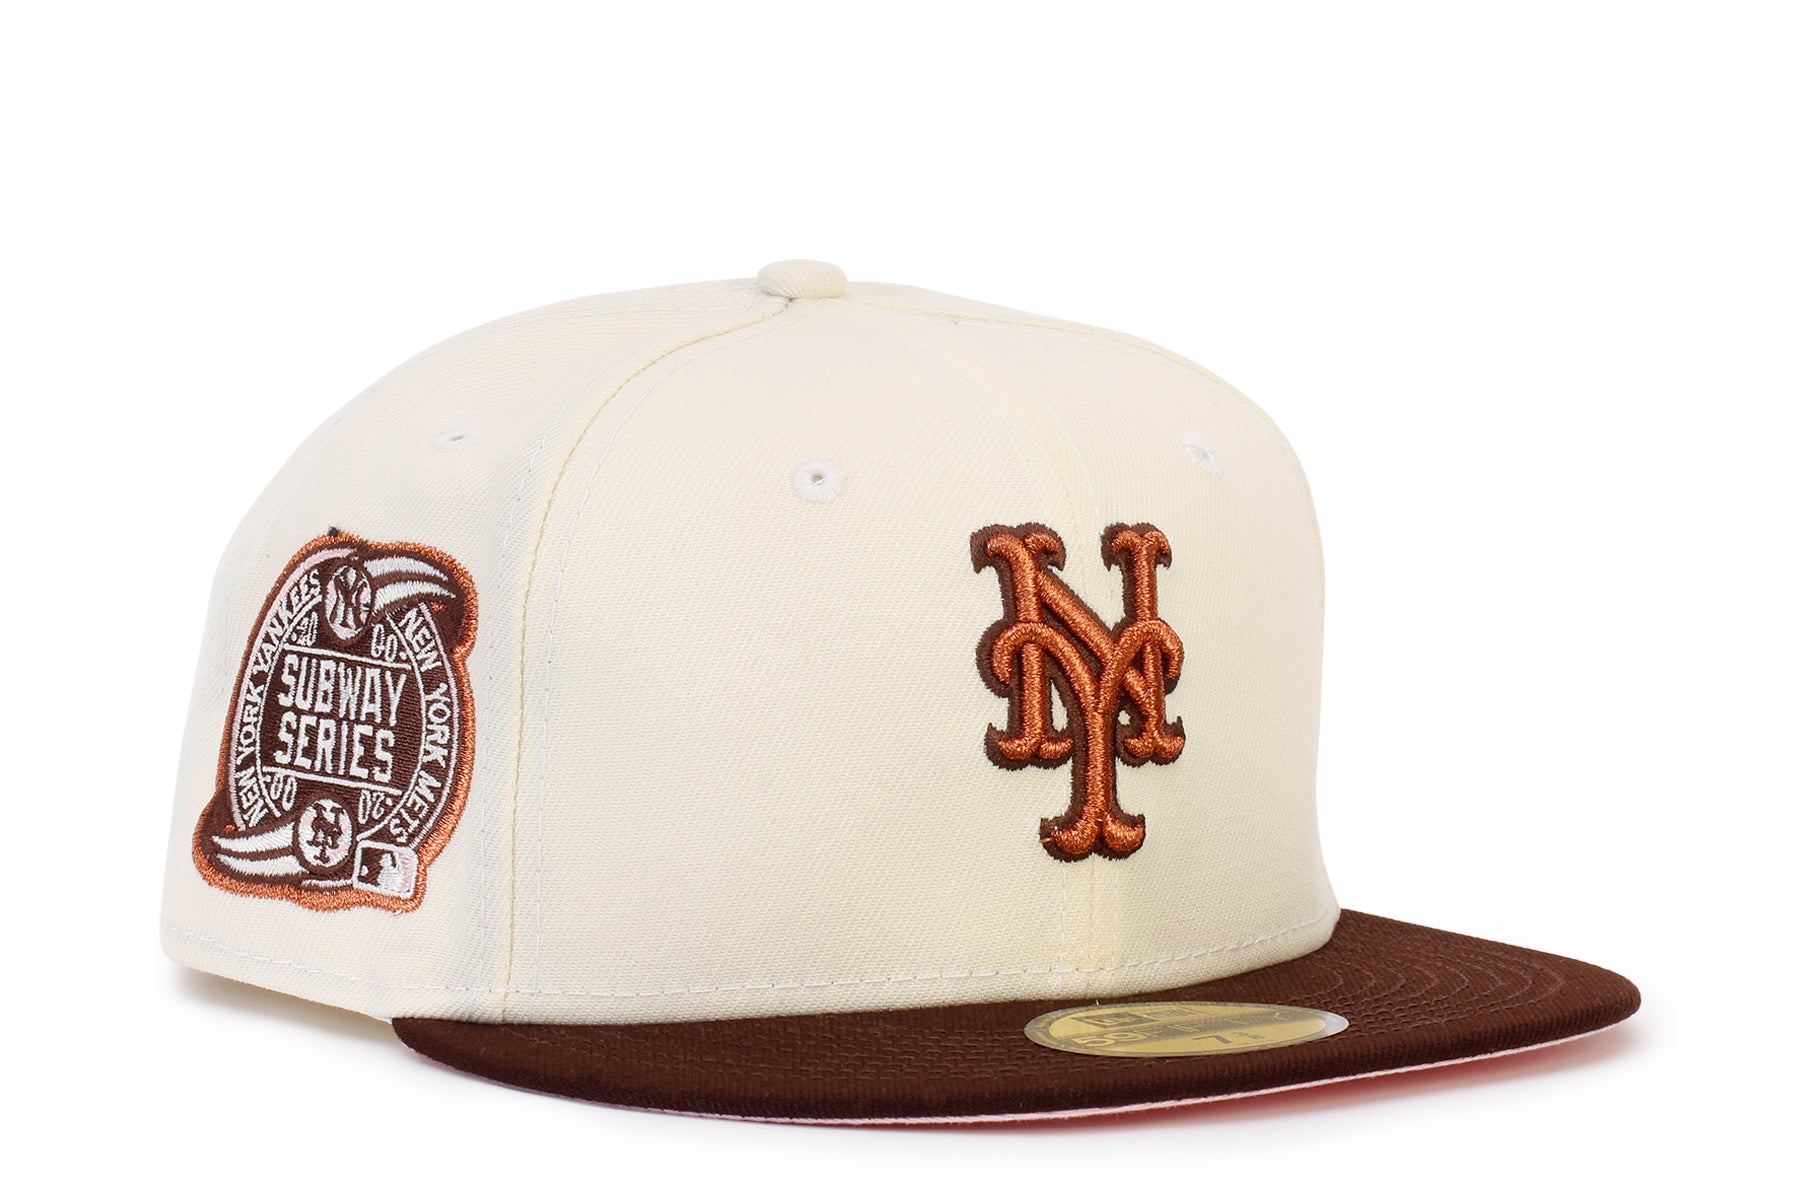 pink brim mets fitted